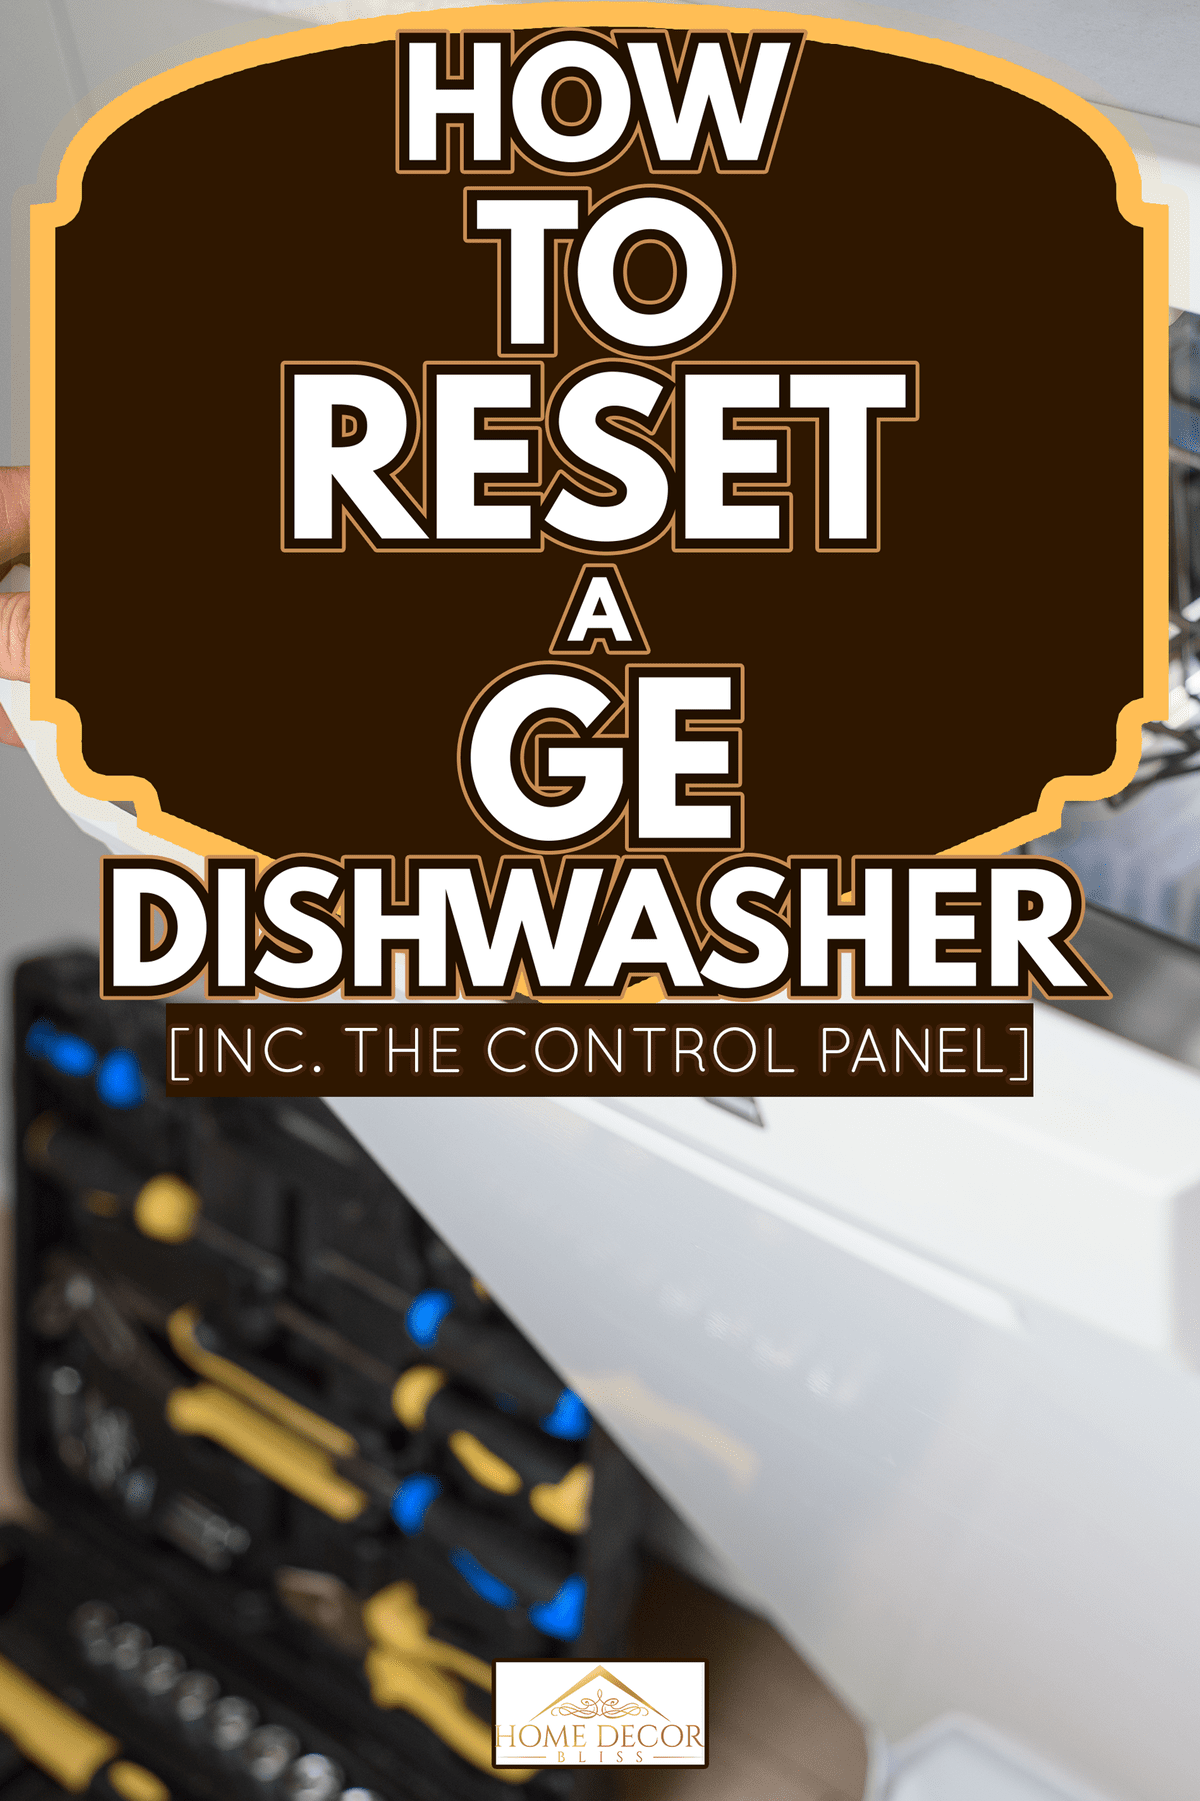 Man repairing a dishwasher with tools - How To Reset A Ge Dishwasher [Inc. The Control Panel]